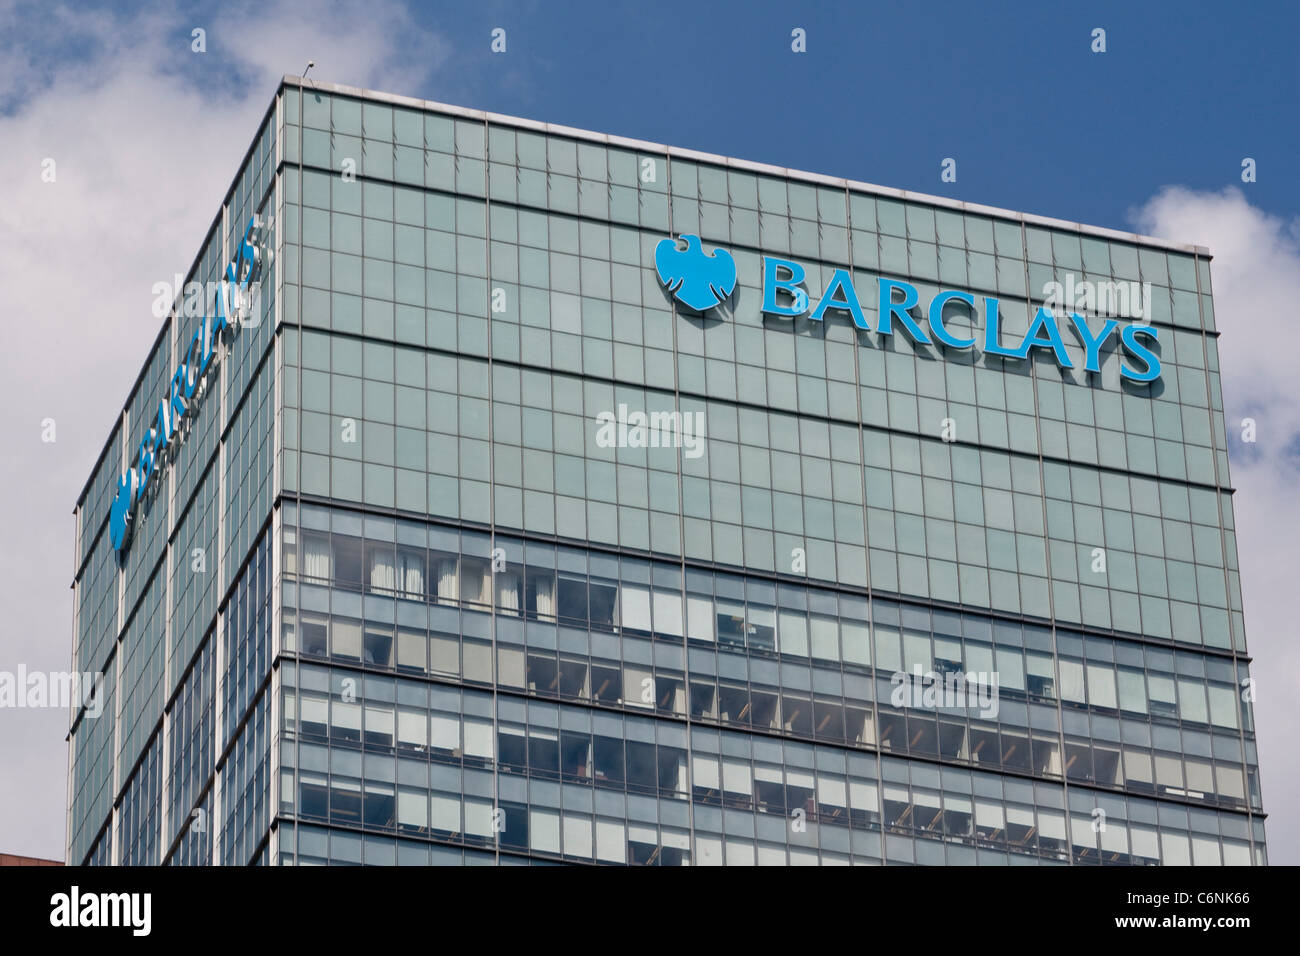 Barclays offices is pictured in the New York City borough of Manhattan, NY, Tuesday August 2, 2011. Stock Photo